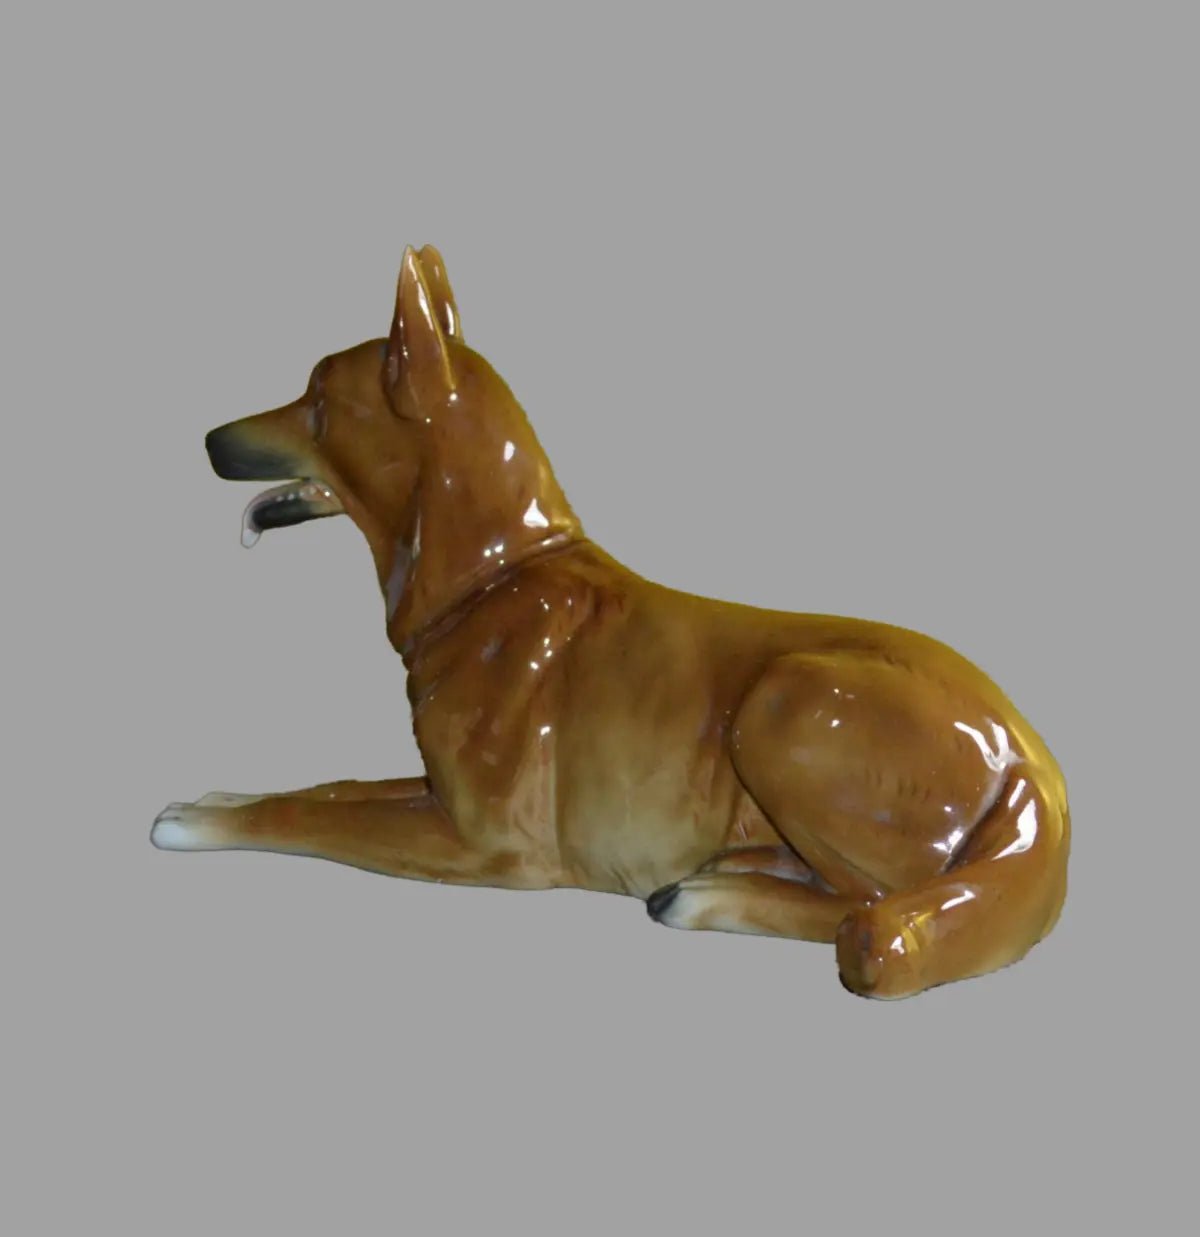 DOG FIGURINE ALSATIAN(PREVIOUSLY OWNED)REALLY GOOD CONDITION - TMD167207